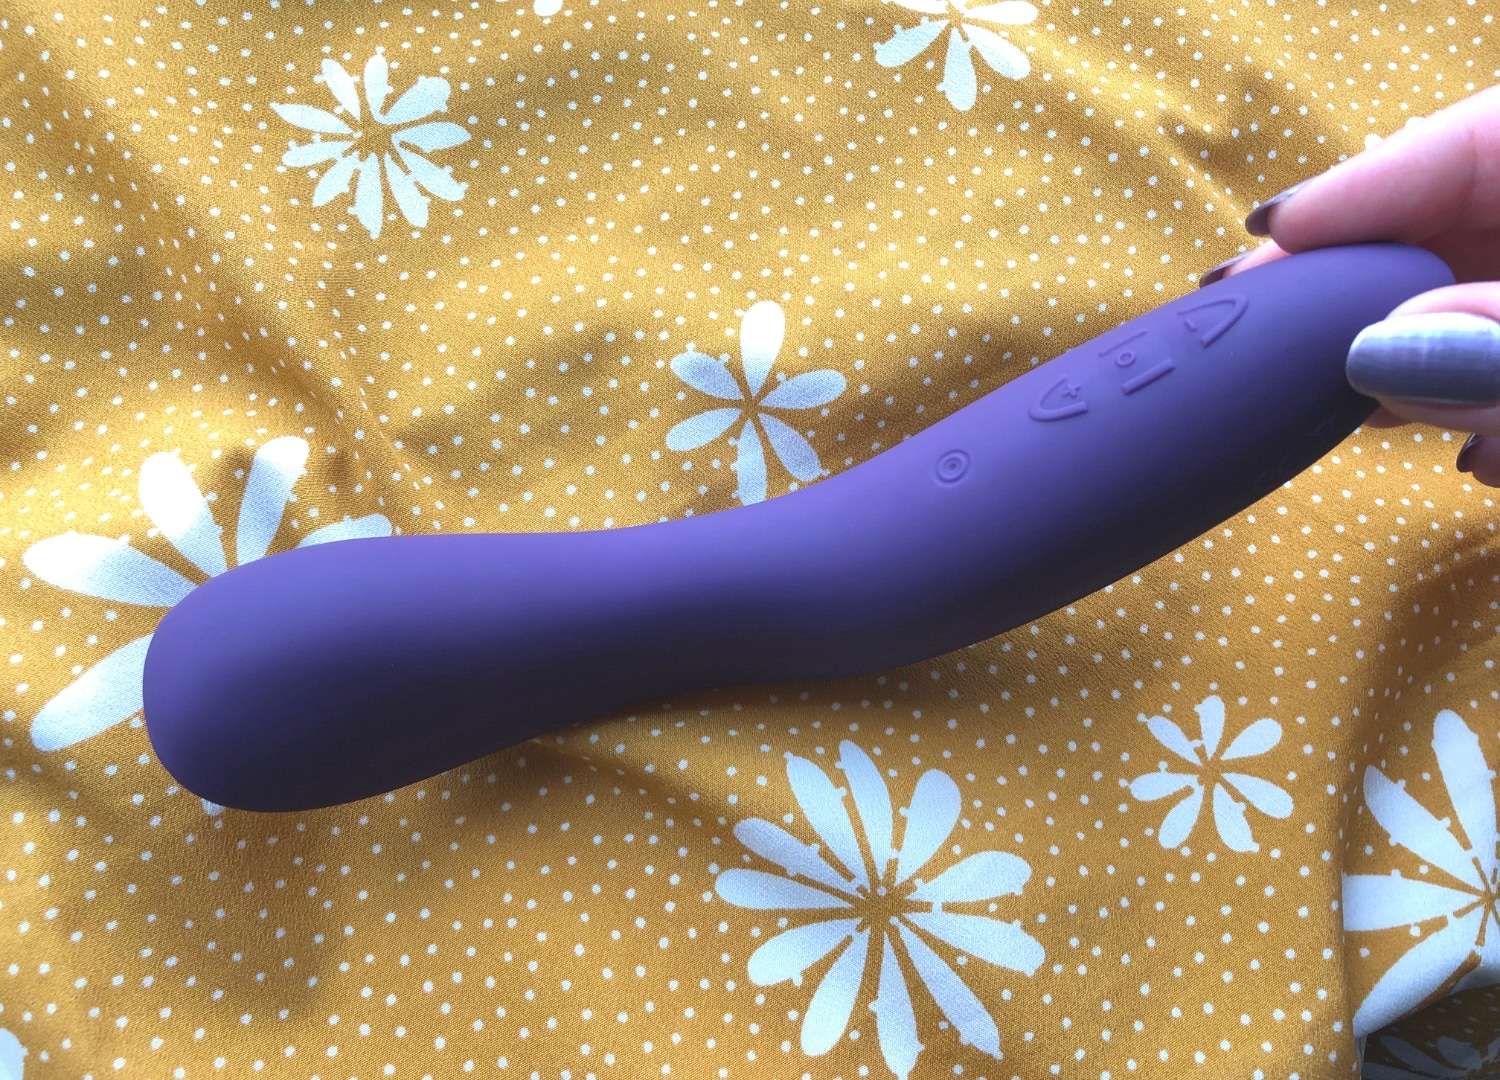 We-Vibe Rave App-Controlled Rechargeable G-Spot Vibrator. Slide 6